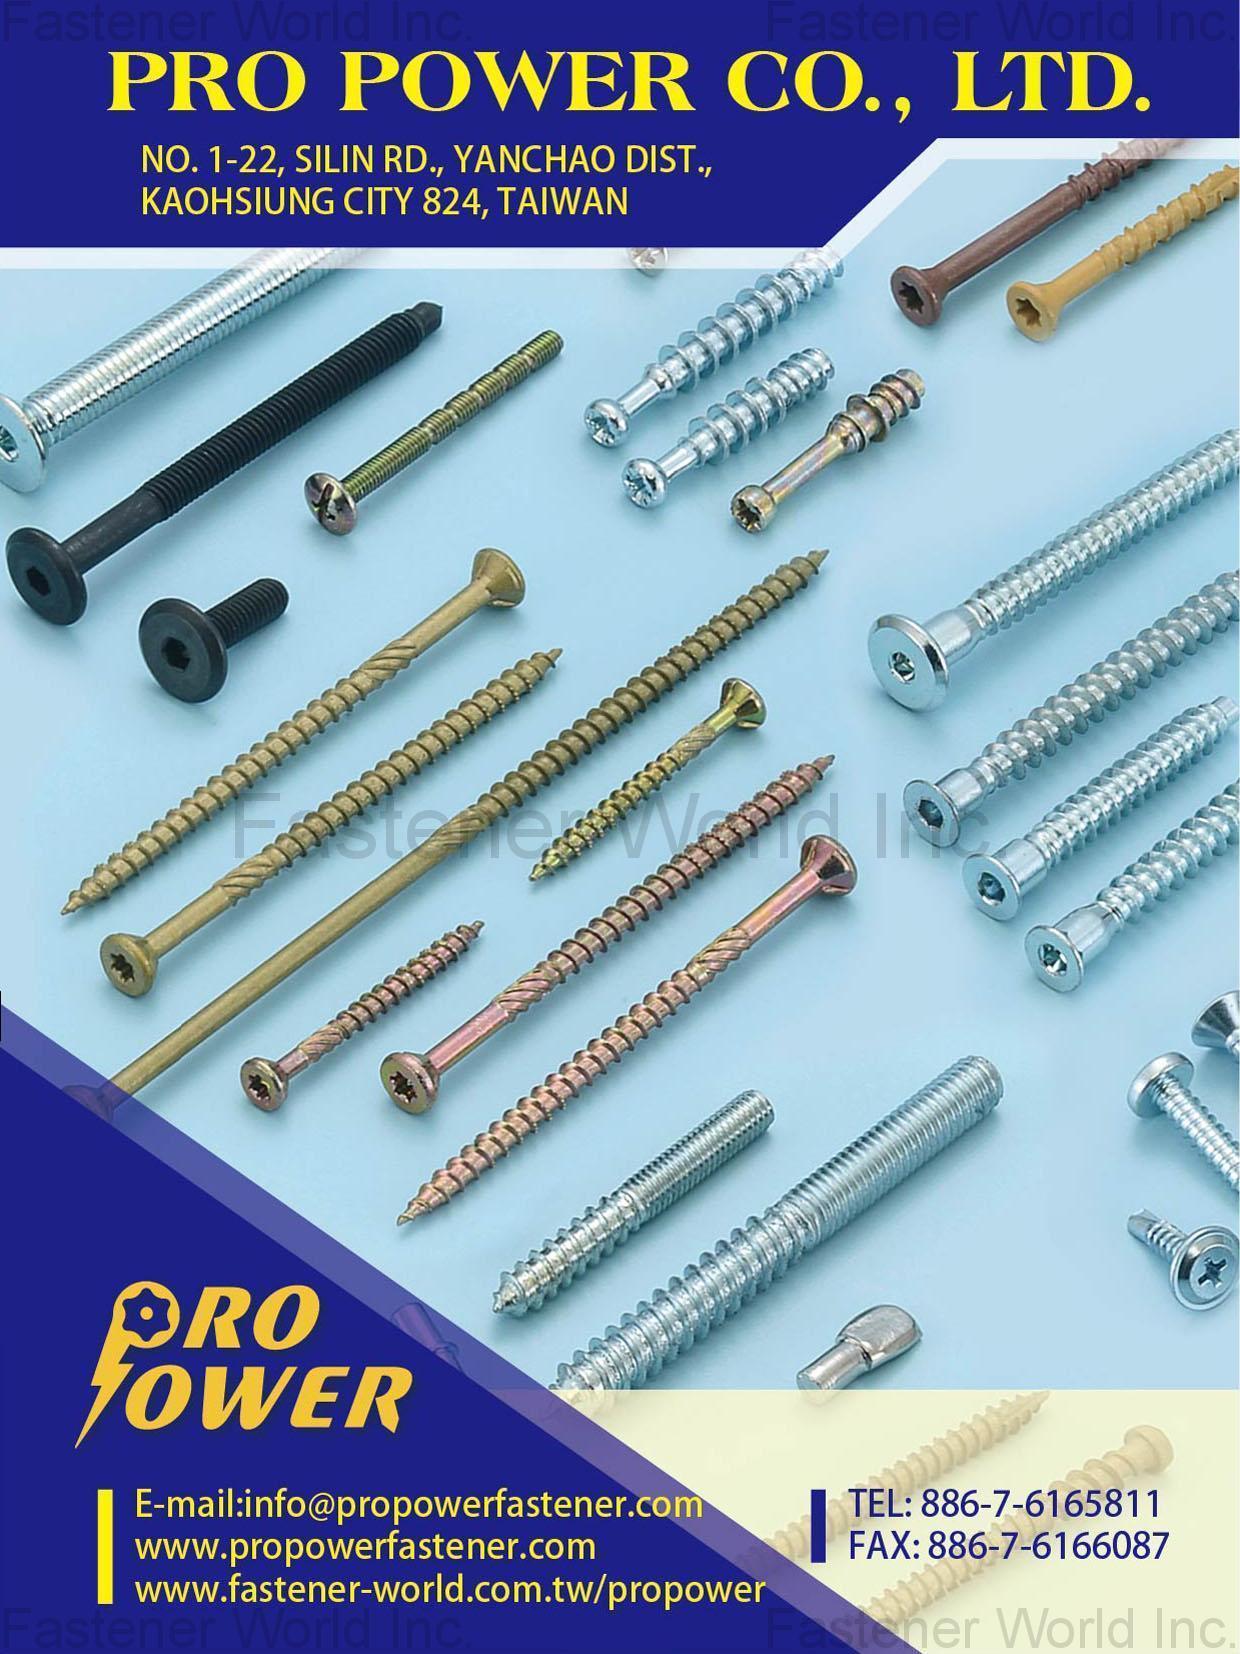 All Kinds Of Building Materials And Accessories DECK SCREW,EURO SCREW, CHIPBOARD SCREW, PARTICLE BOARD SCREW, SELF DRILLING SCREW, SELF TAPPING SCREW, DRYWALL SCREW, CONFIRMAT SCREW, SLEEVE SCREW, MACHINE SCREW, JOINT CONNECTOR BOLT, BREAK-OFF MACHINE SCREW, SLEEVE NUT, SHELF SUPPORT(PIN)